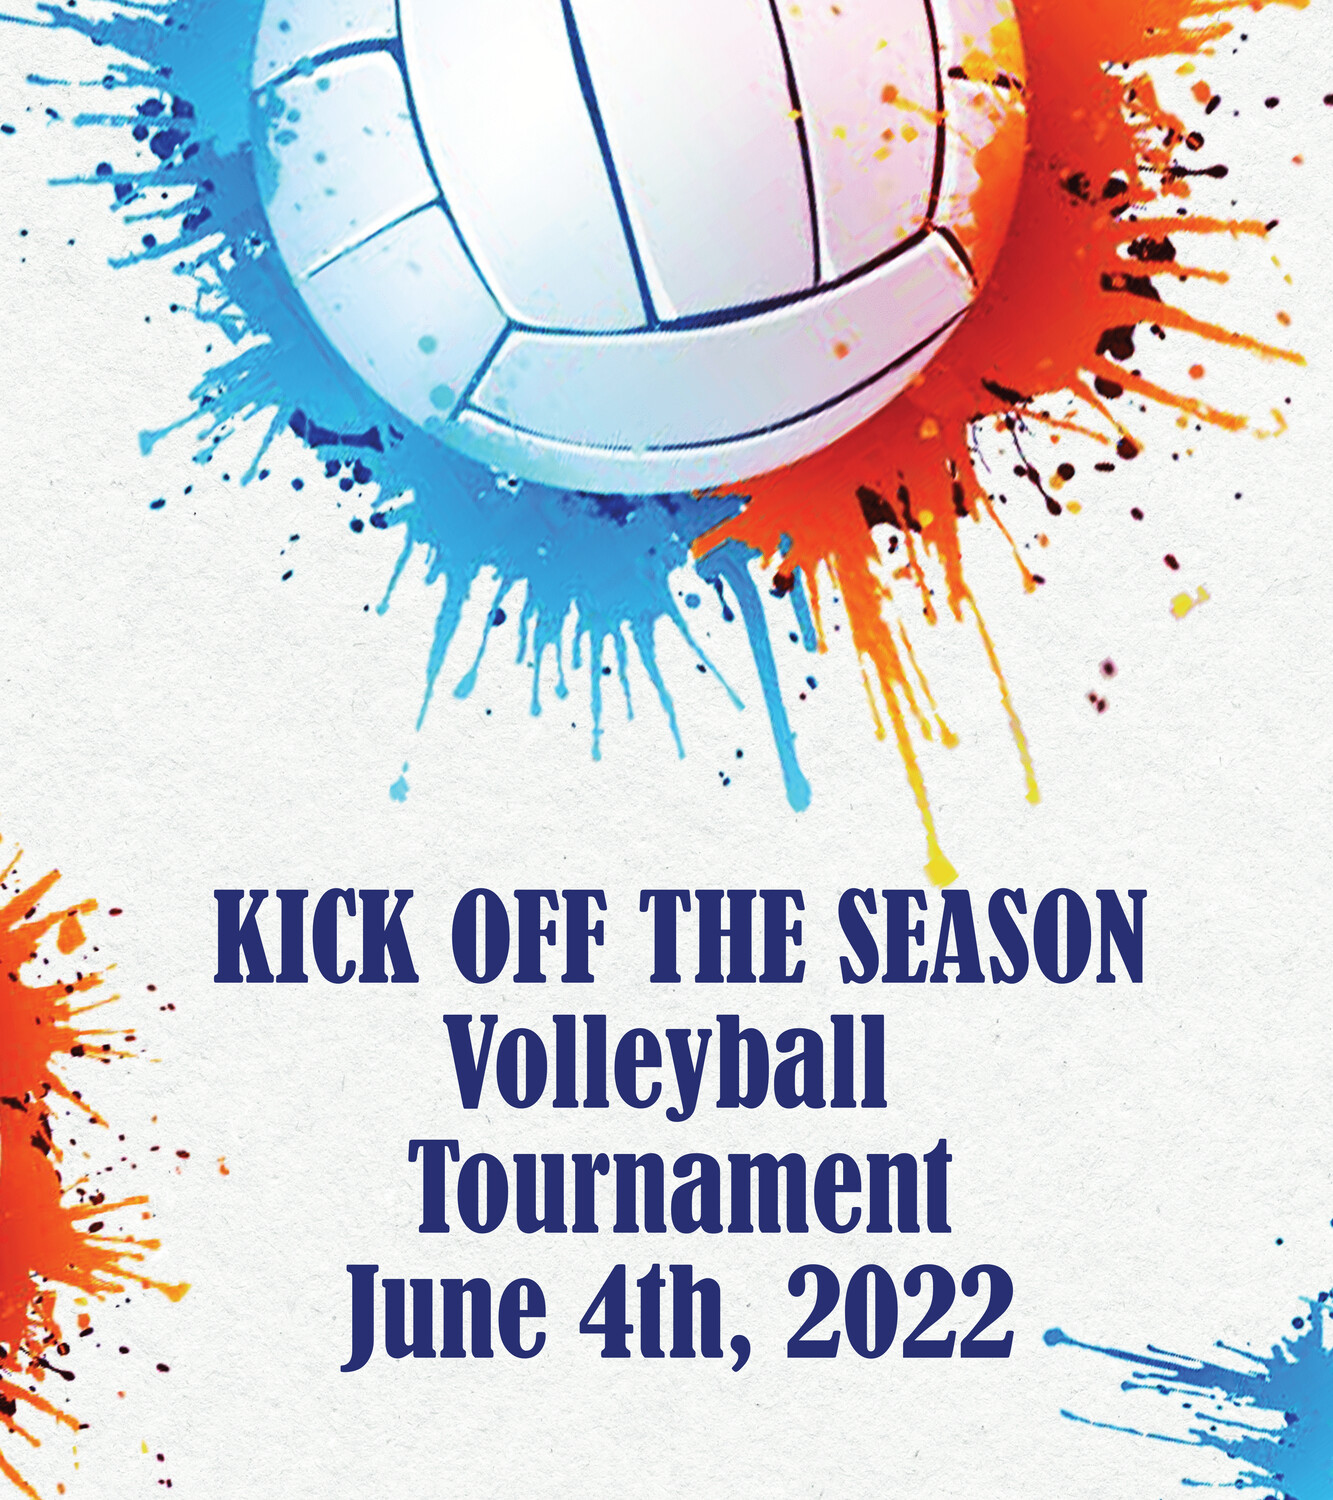 Kick Off the Summer Tournament - Soliday's June 4th, 2022